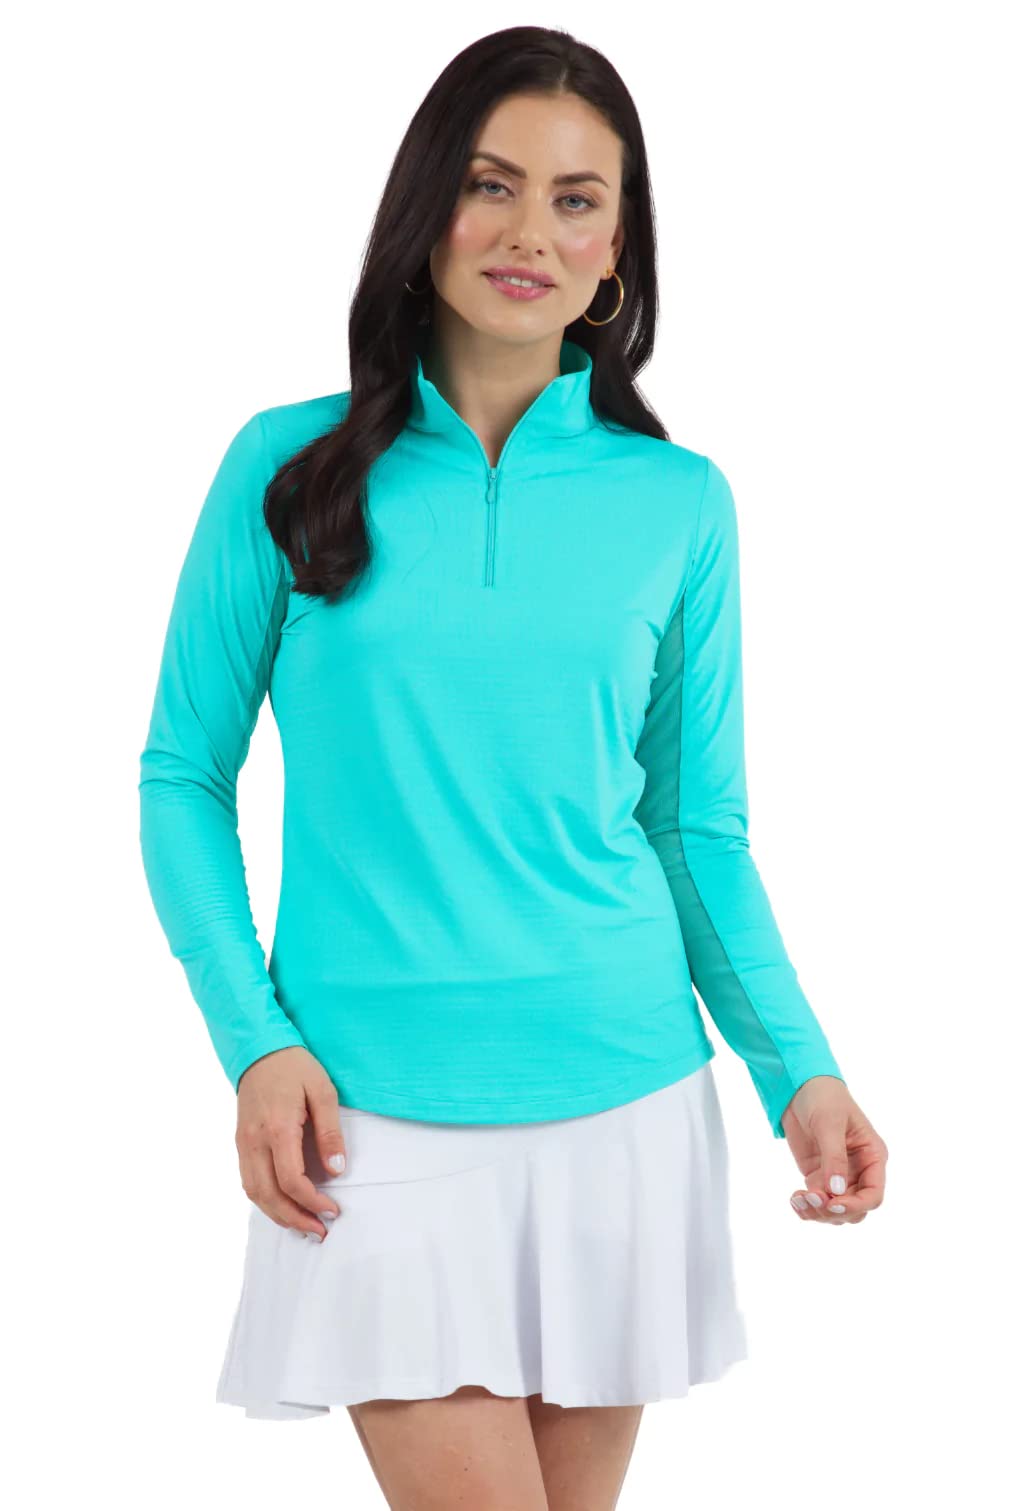 IBKUL Athleisure Wear Sun Protective UPF 50+ Icefil Cooling Tech Long Sleeve Mock Neck Top with Under Arm Mesh 80000 Jade Solid S